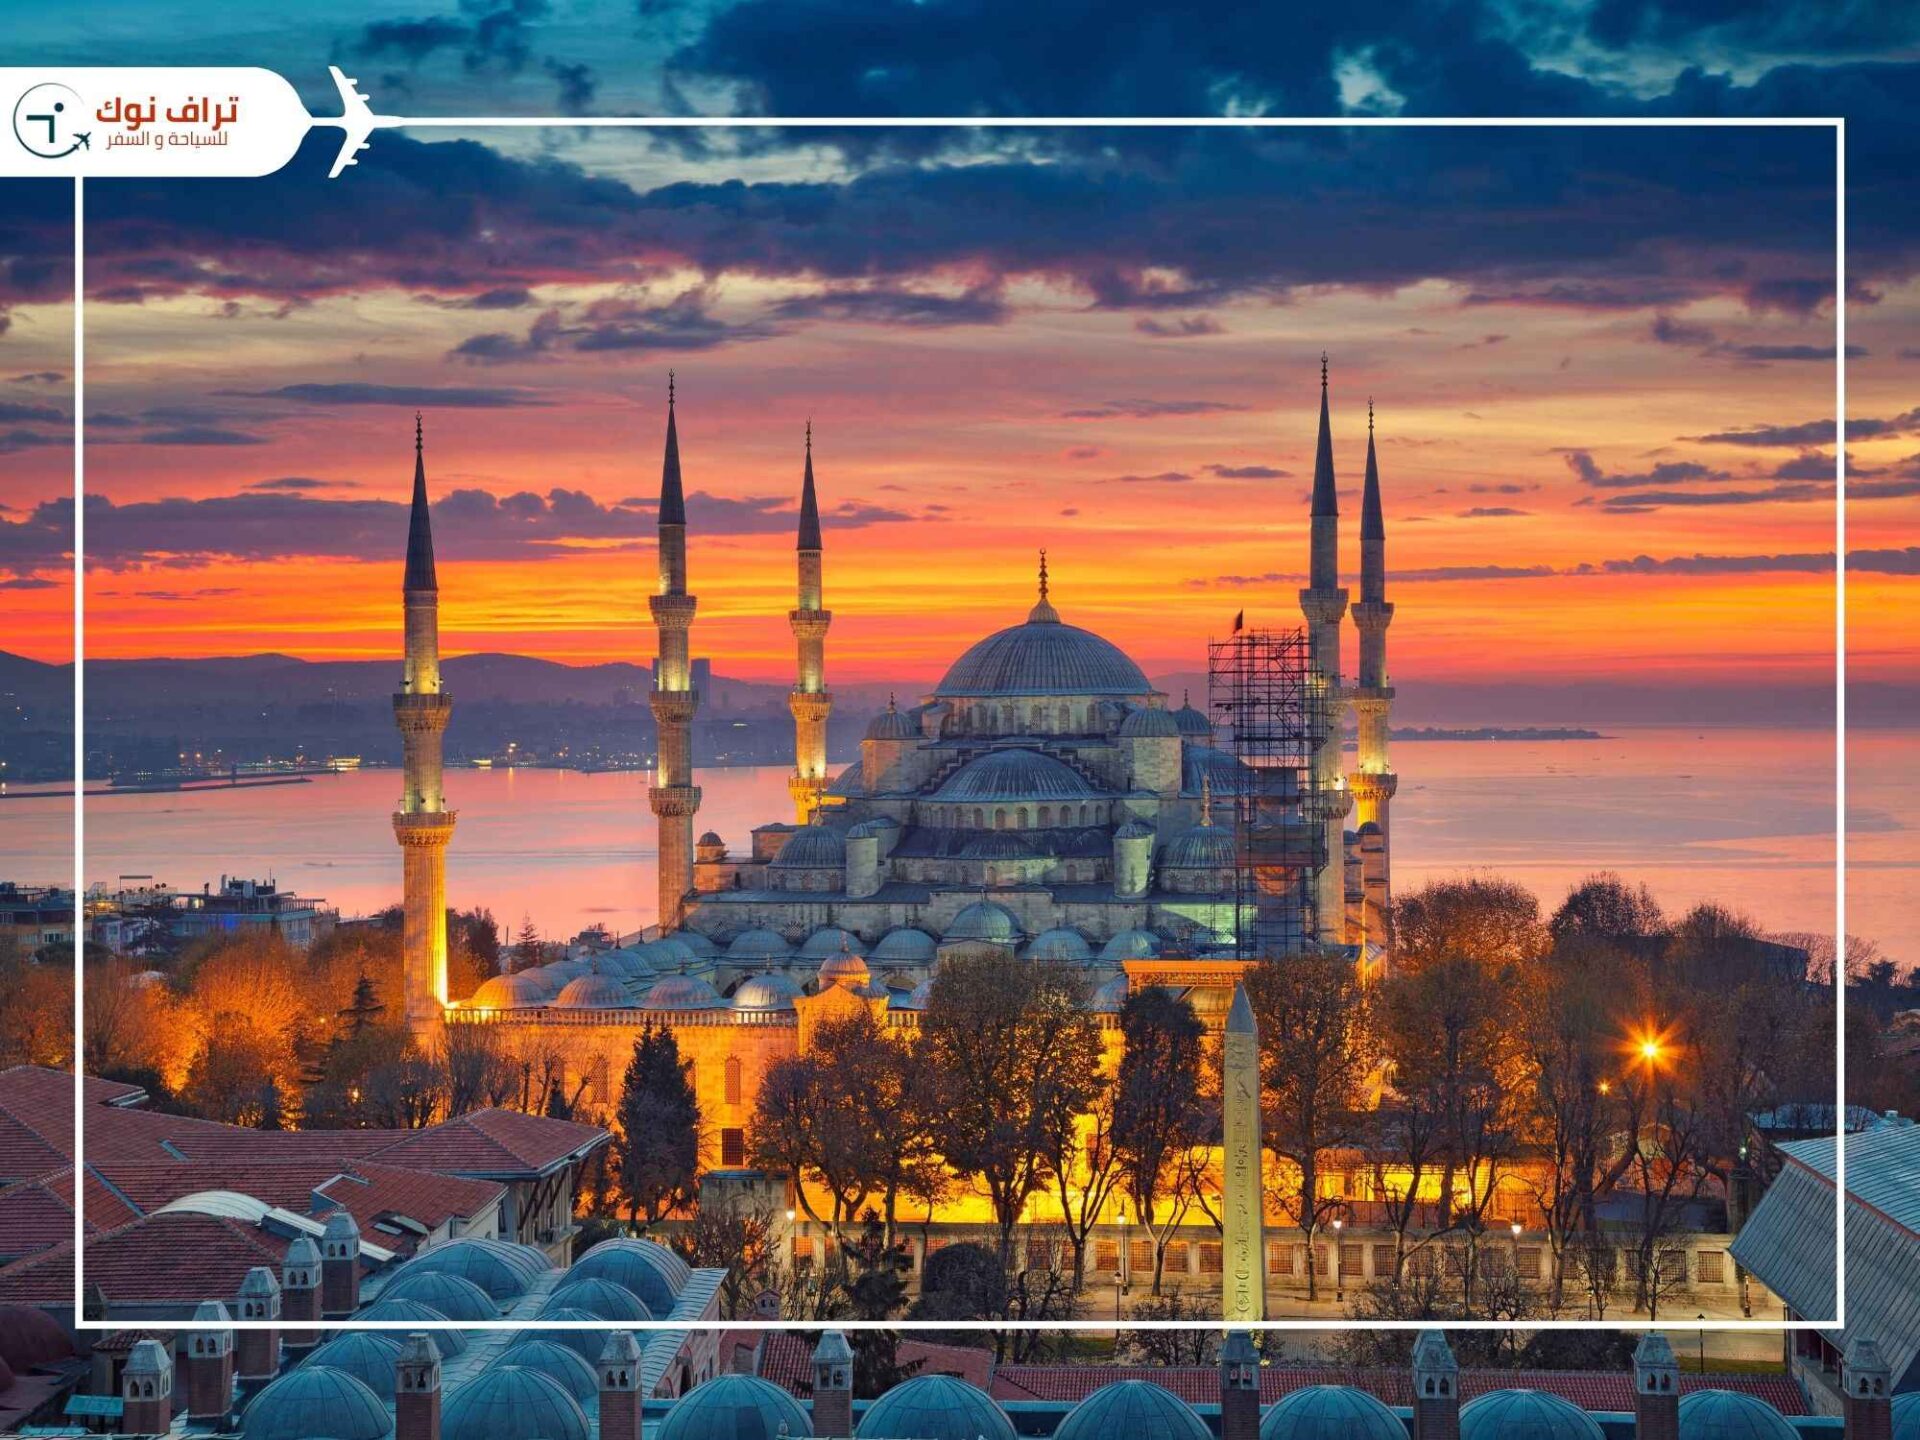 Places to visit during eid holidays from Dubai - Istanbul, Turkey